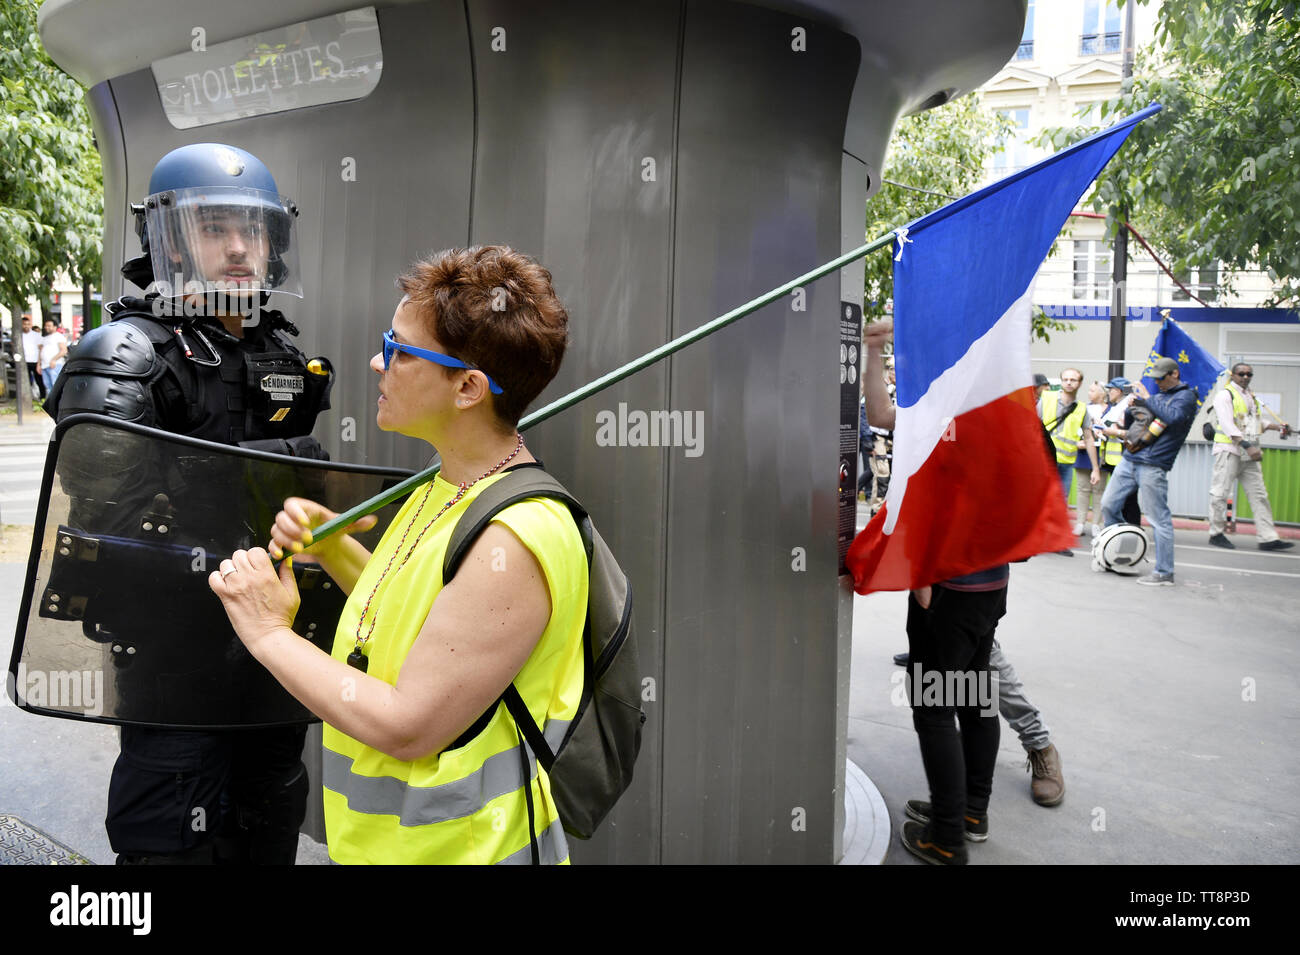 31th saturday of protest for the yellow vests - Paris - France Stock Photo